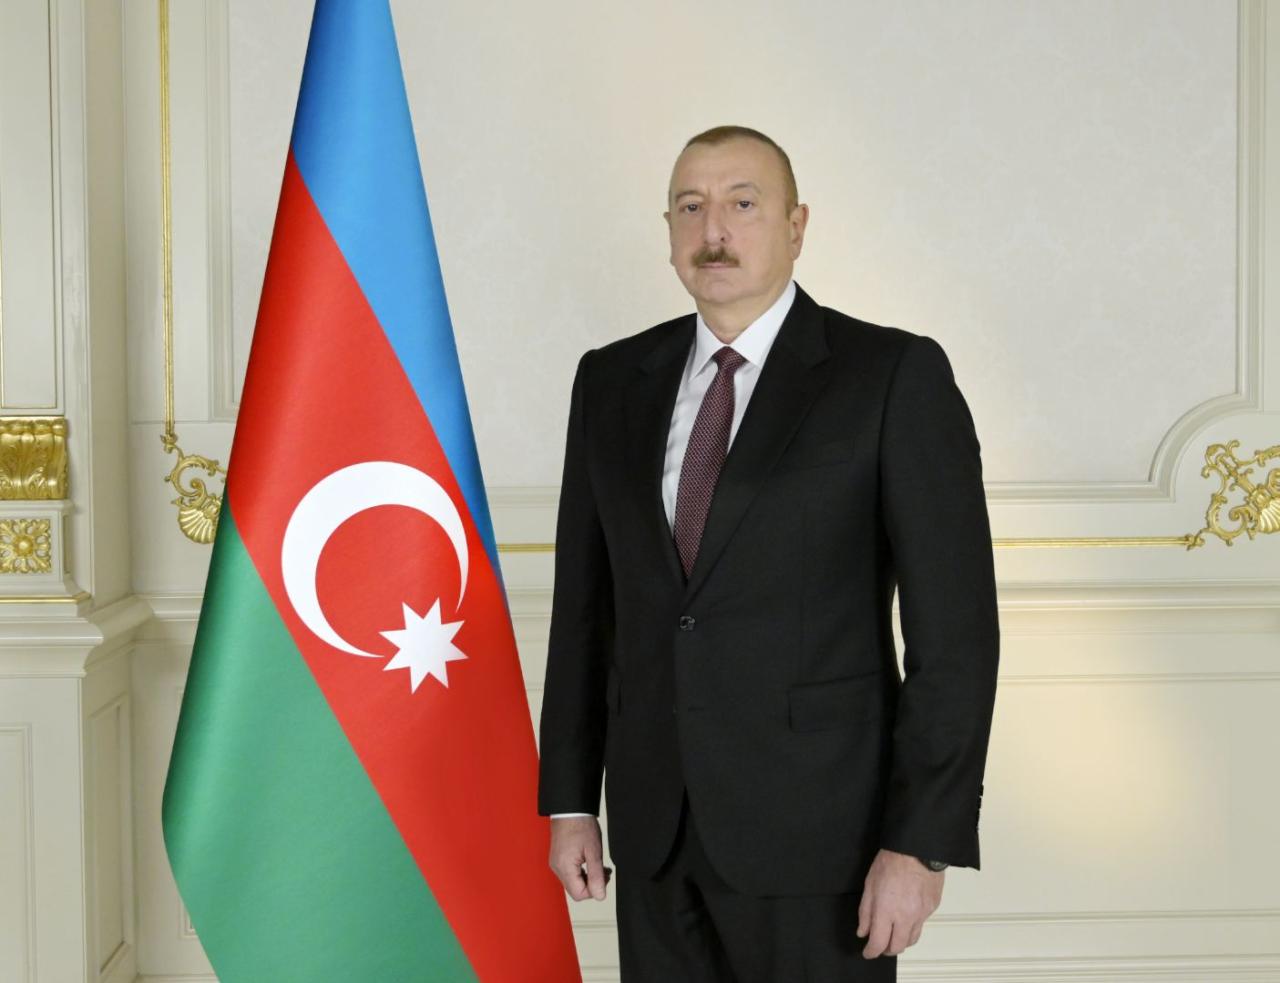 President Aliyev makes Facebook post on occasion of anniversary of January 20 tragedy [PHOTO]